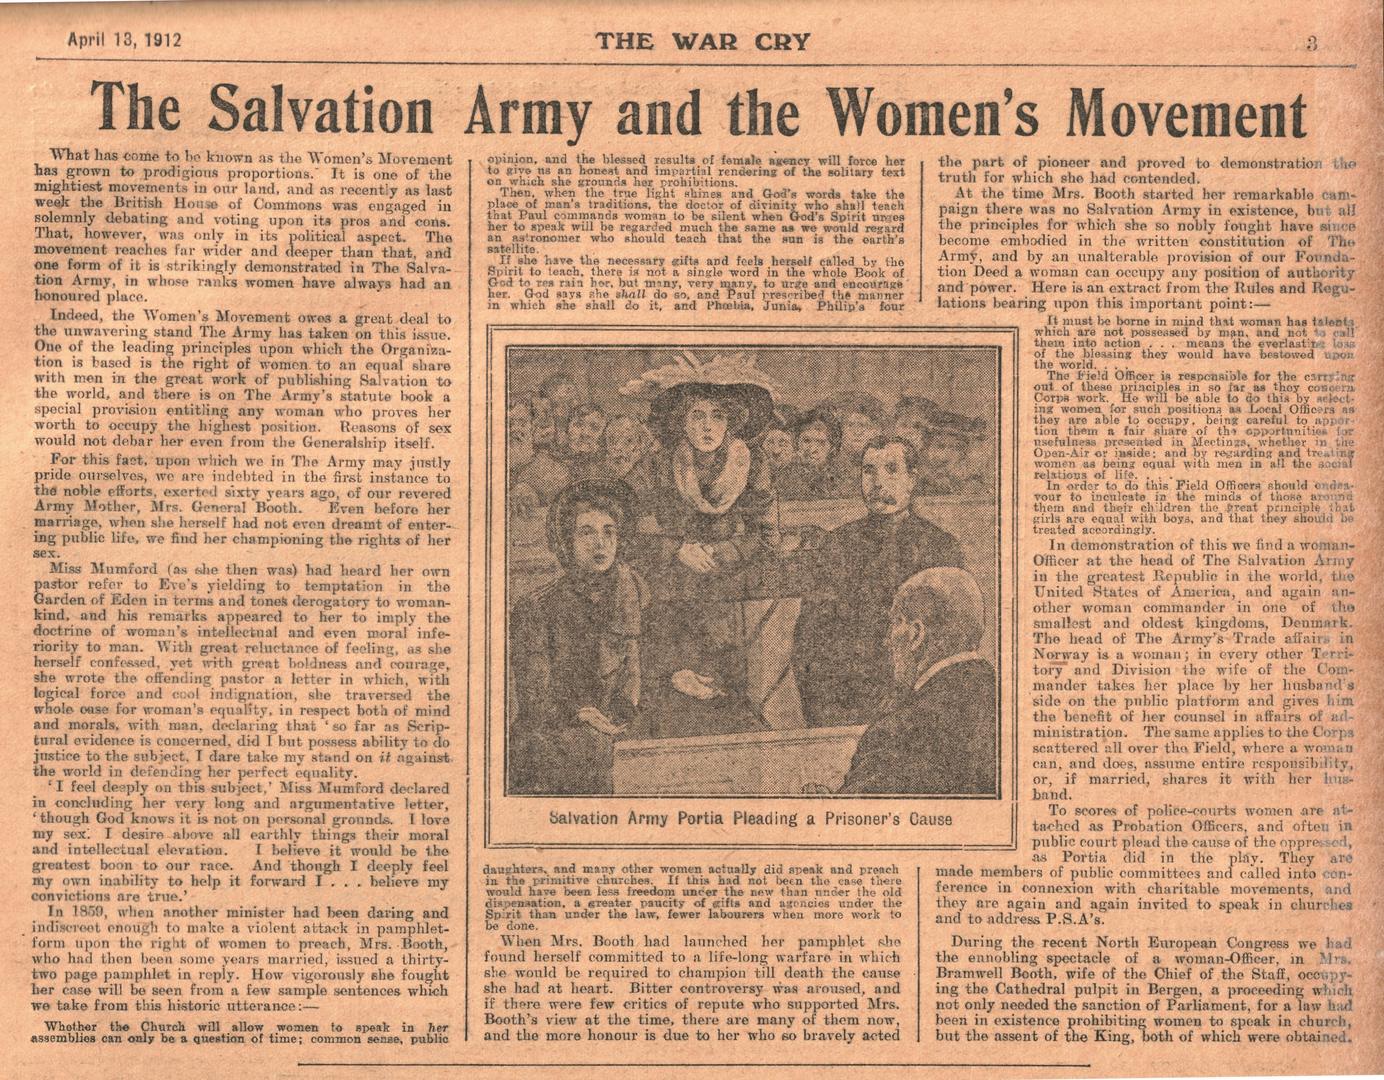 'The Women's Movement' article from The War Cry, 1912